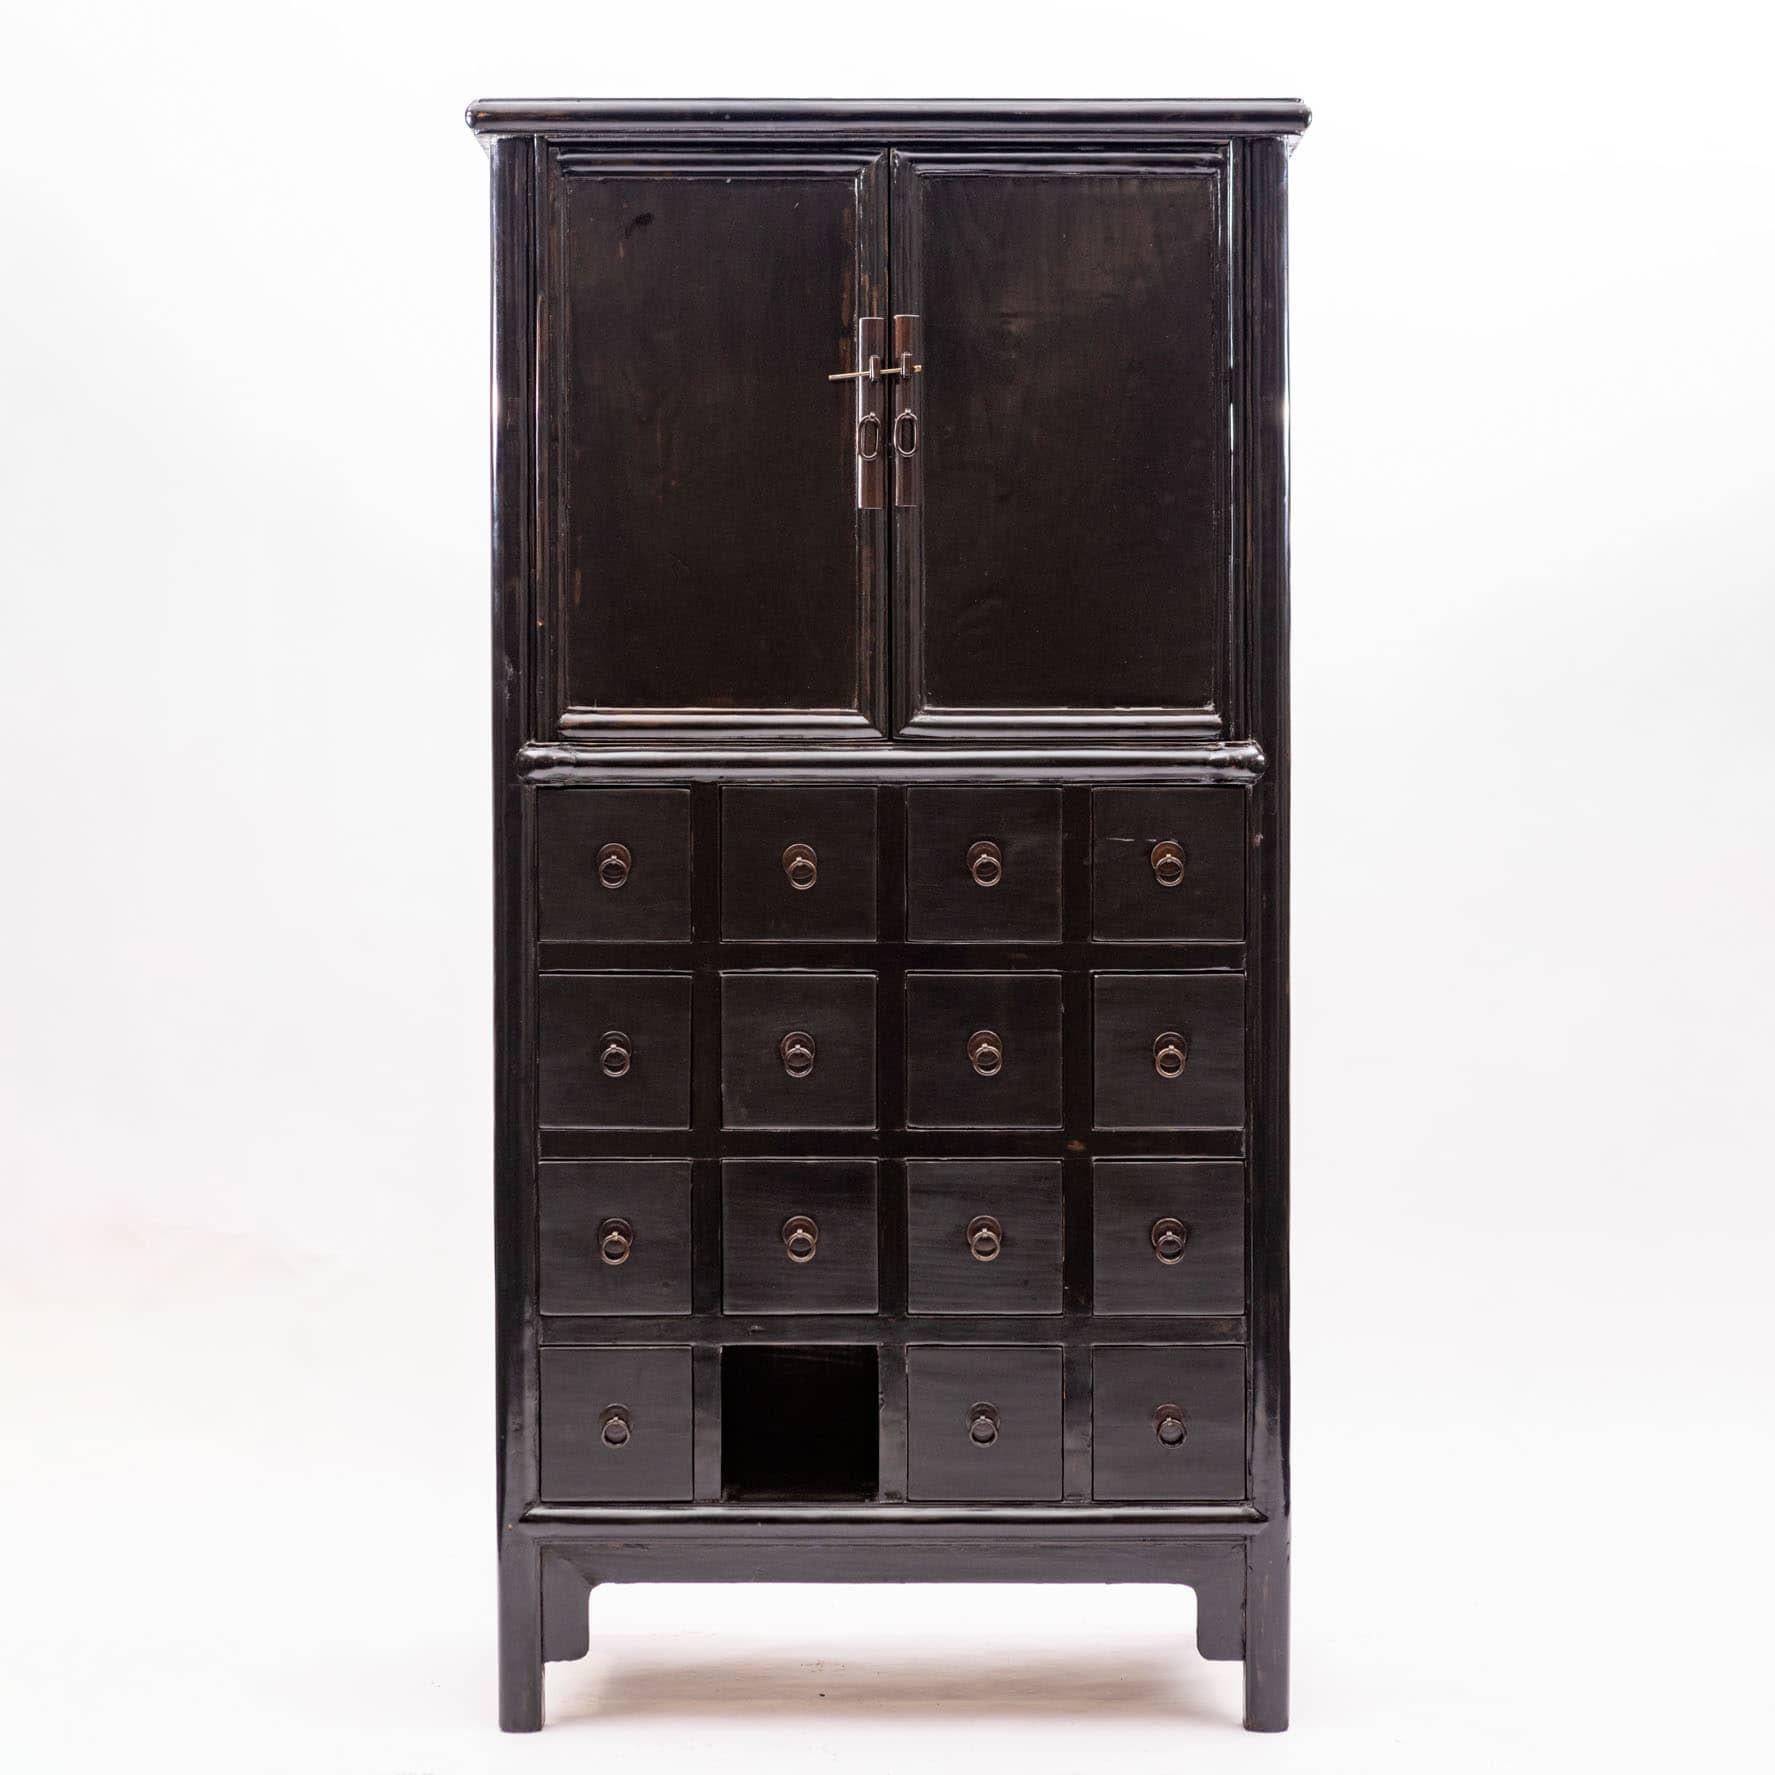 Pharmacy cabinet in elm wood with original black lacquer.
Top pair of doors under 16 drawers.
Shanxi Province 1860 - 1880.
 